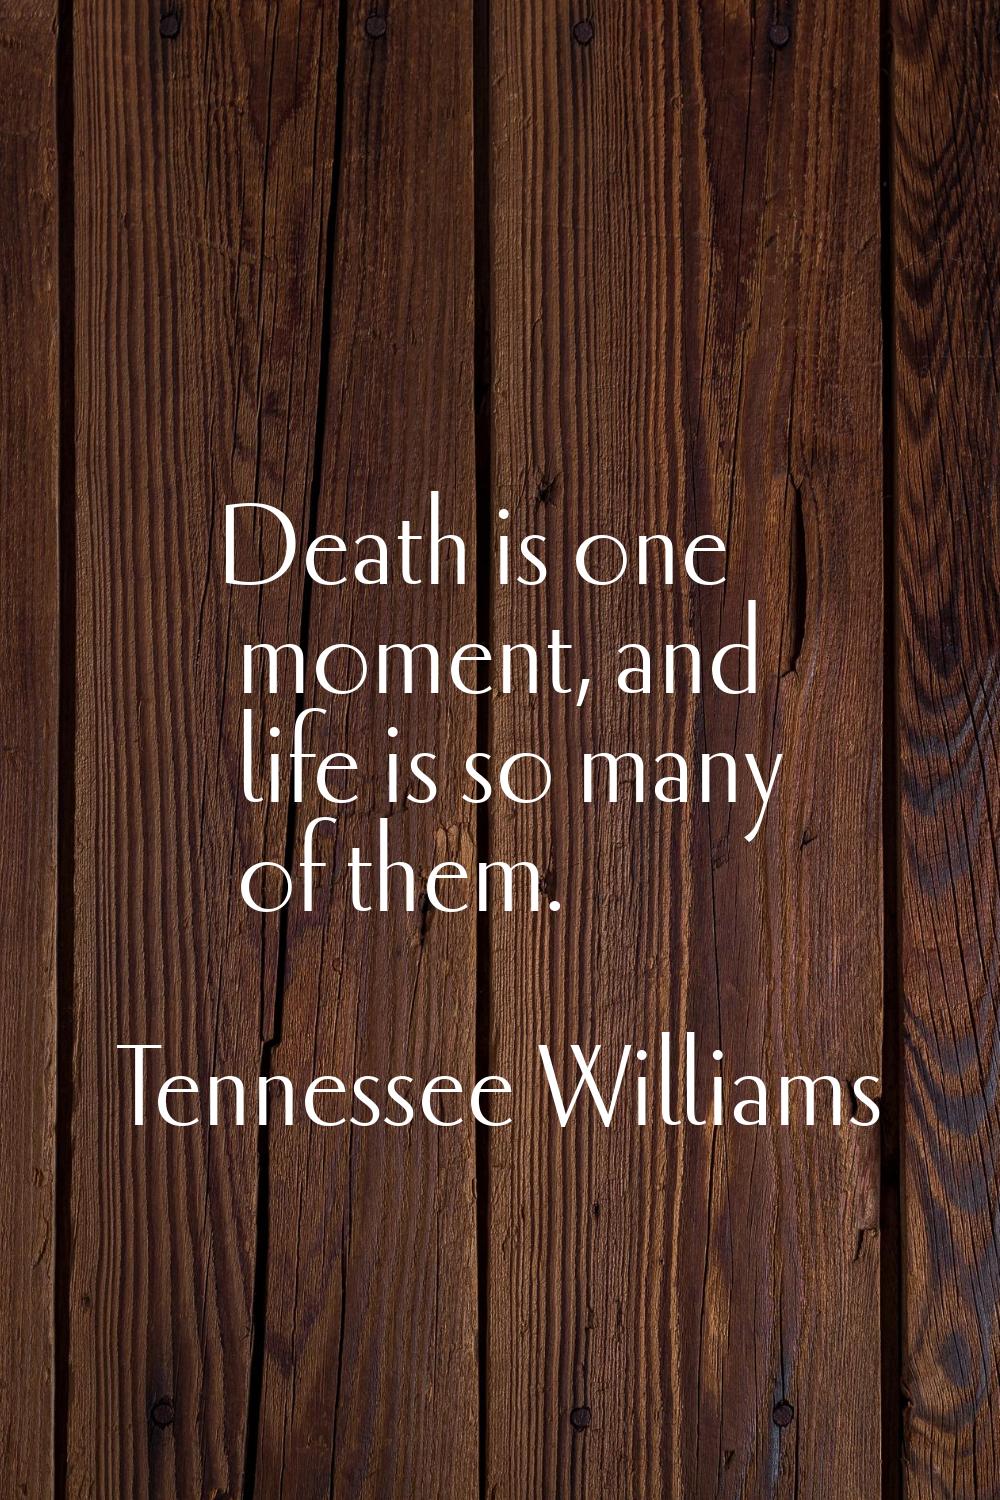 Death is one moment, and life is so many of them.